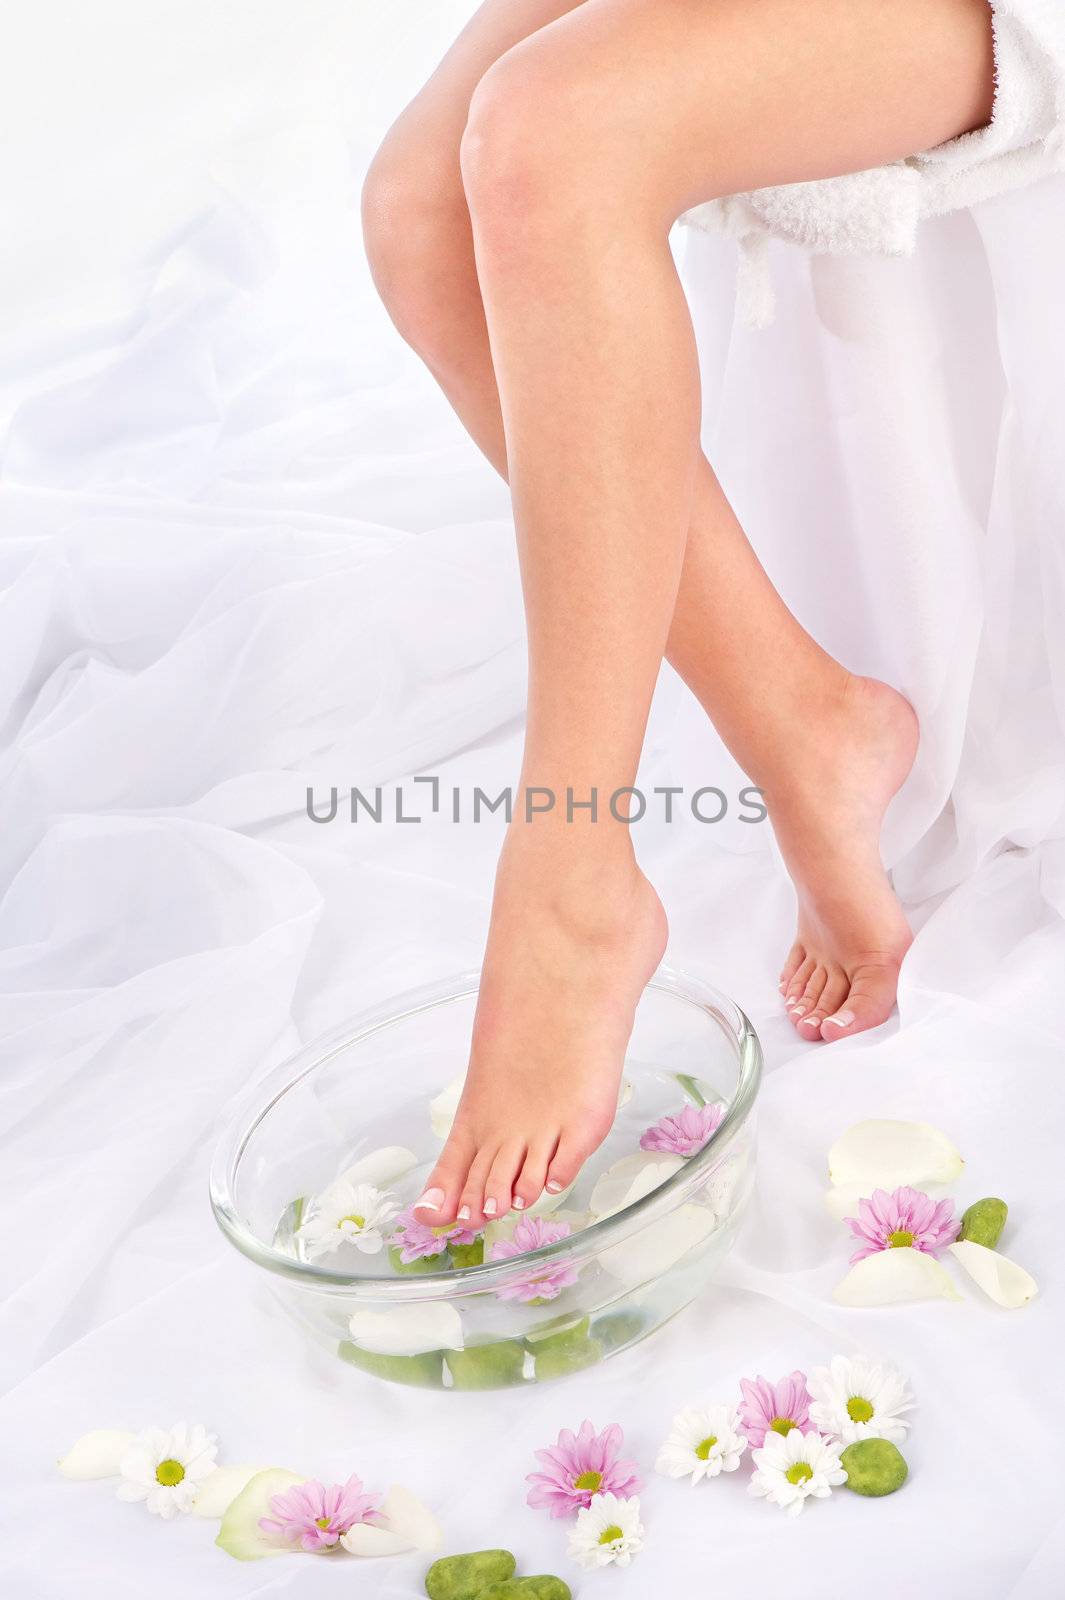 Slim legs in aromatherapy bowl, composition sided